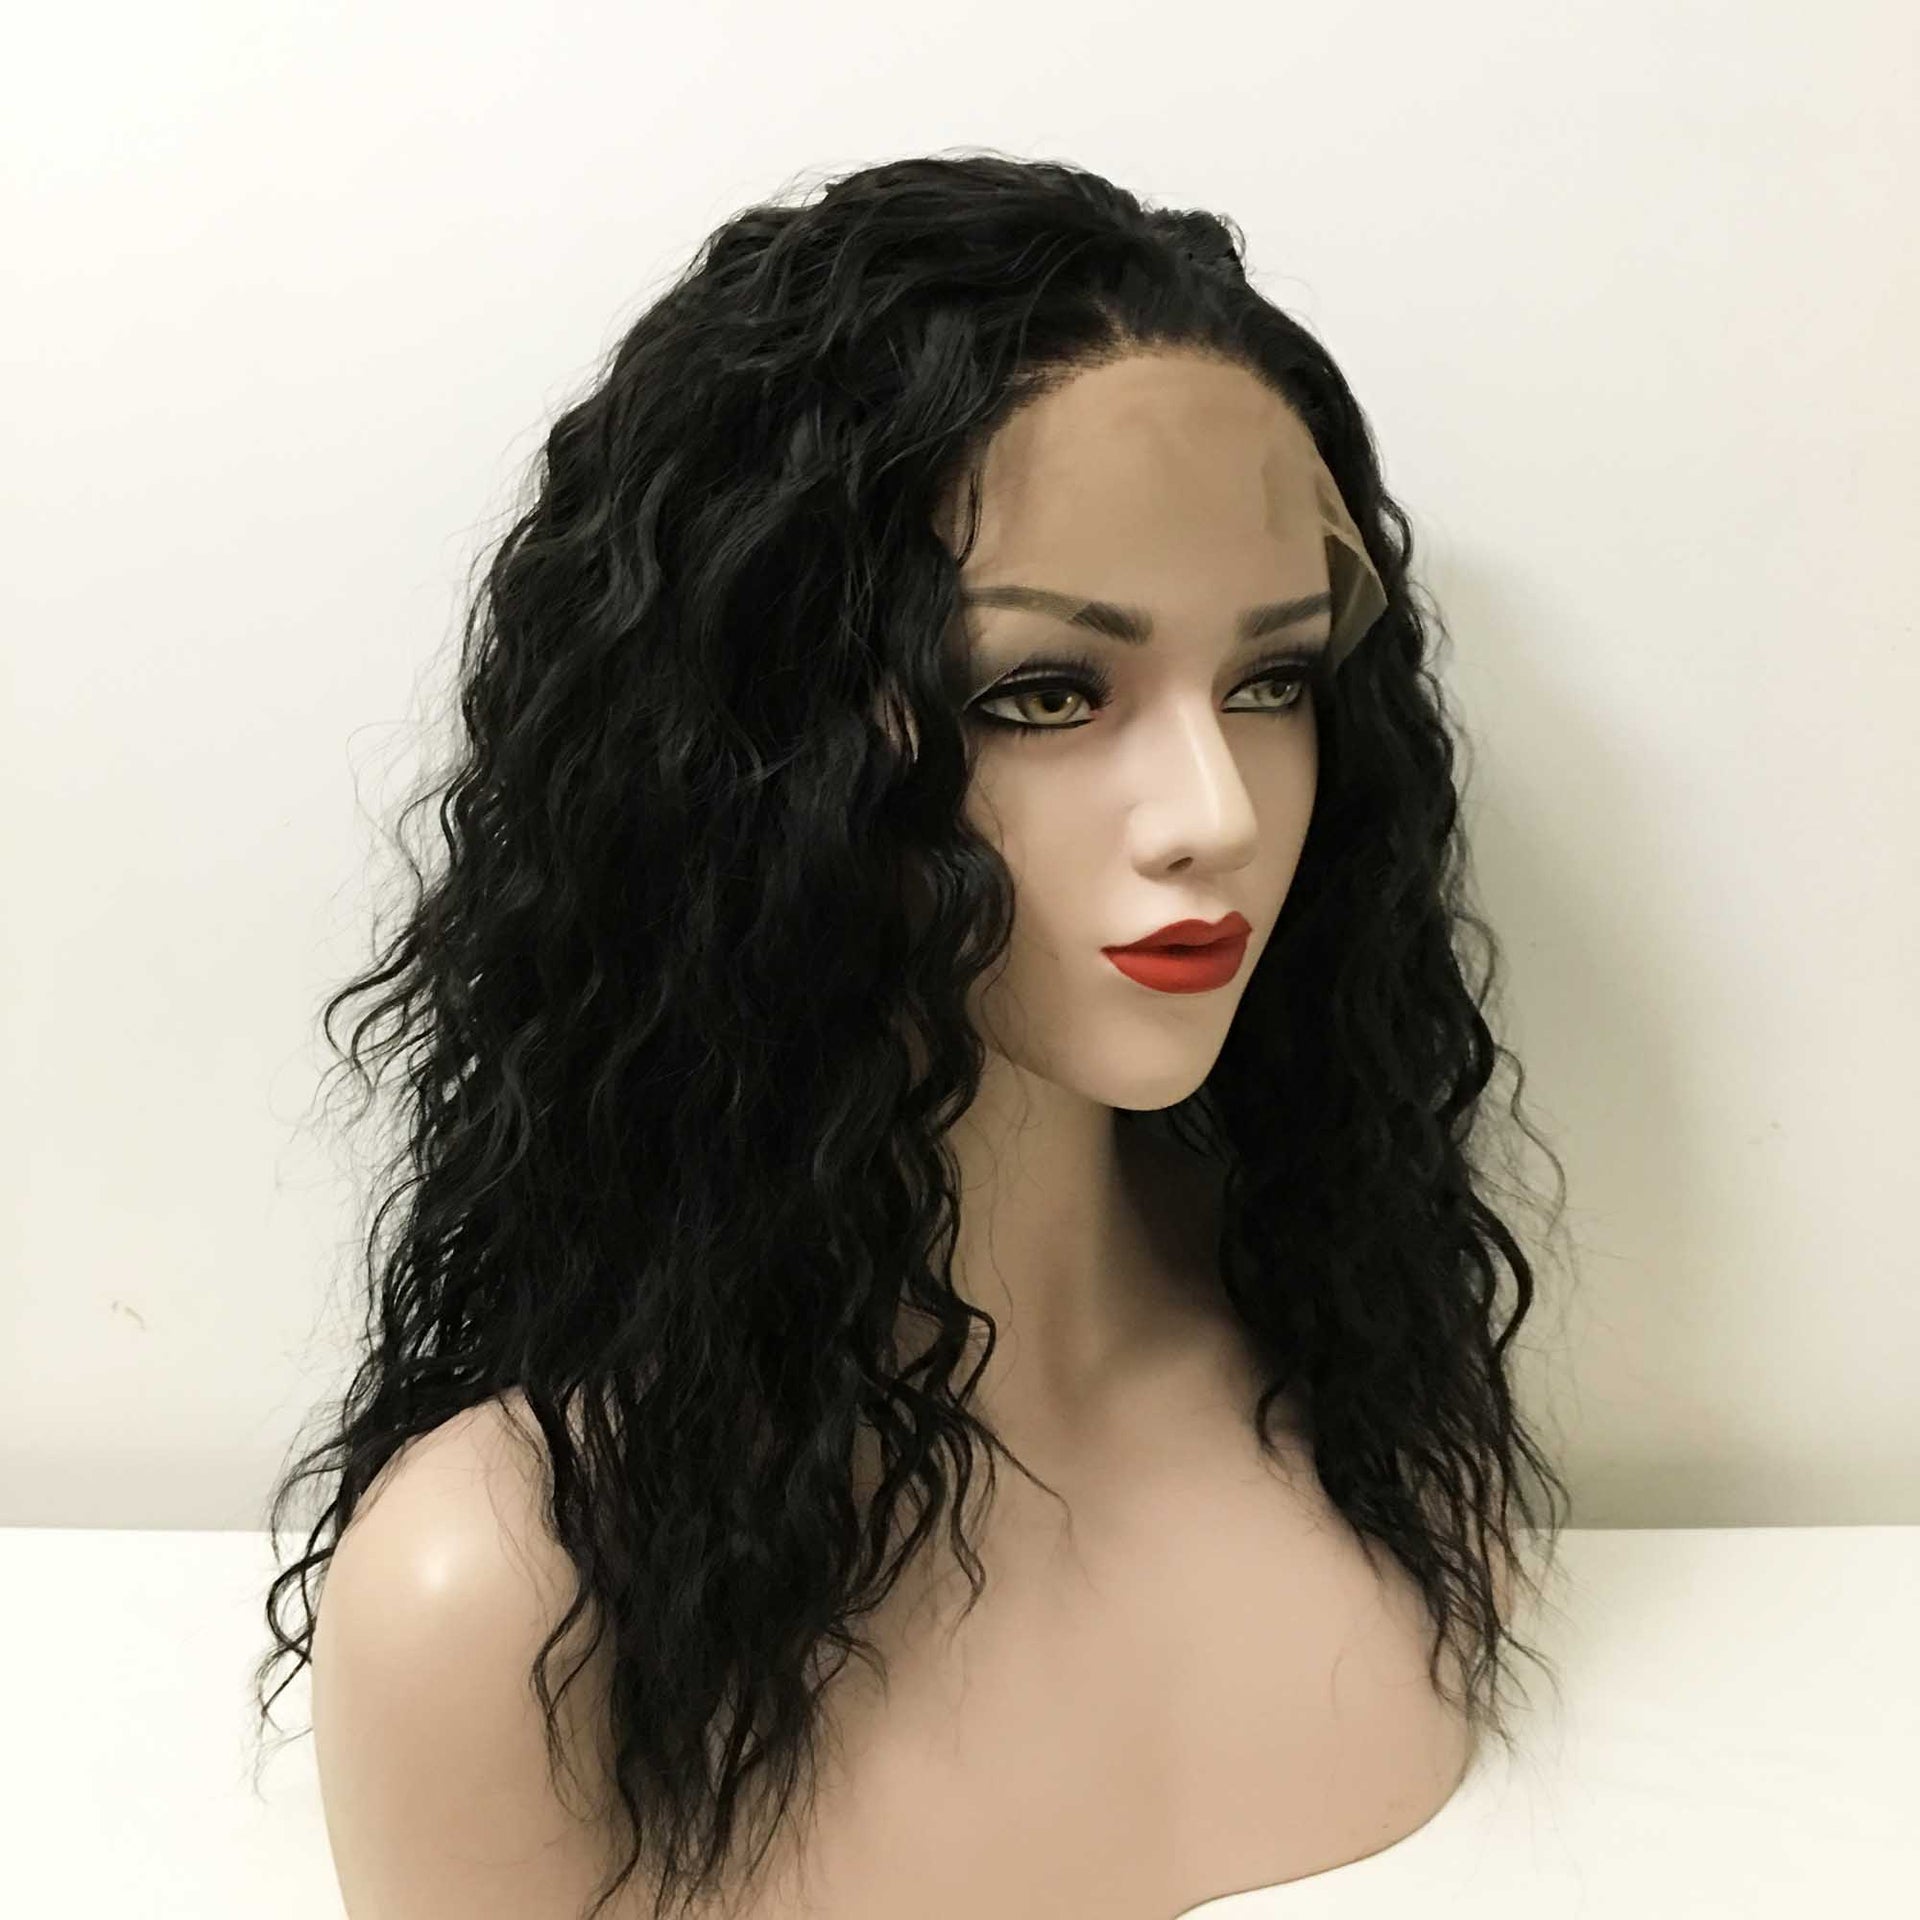 nevermindyrhead Women Black lace Front Free Part Curly Fluffy Layers Thick Volume Wig